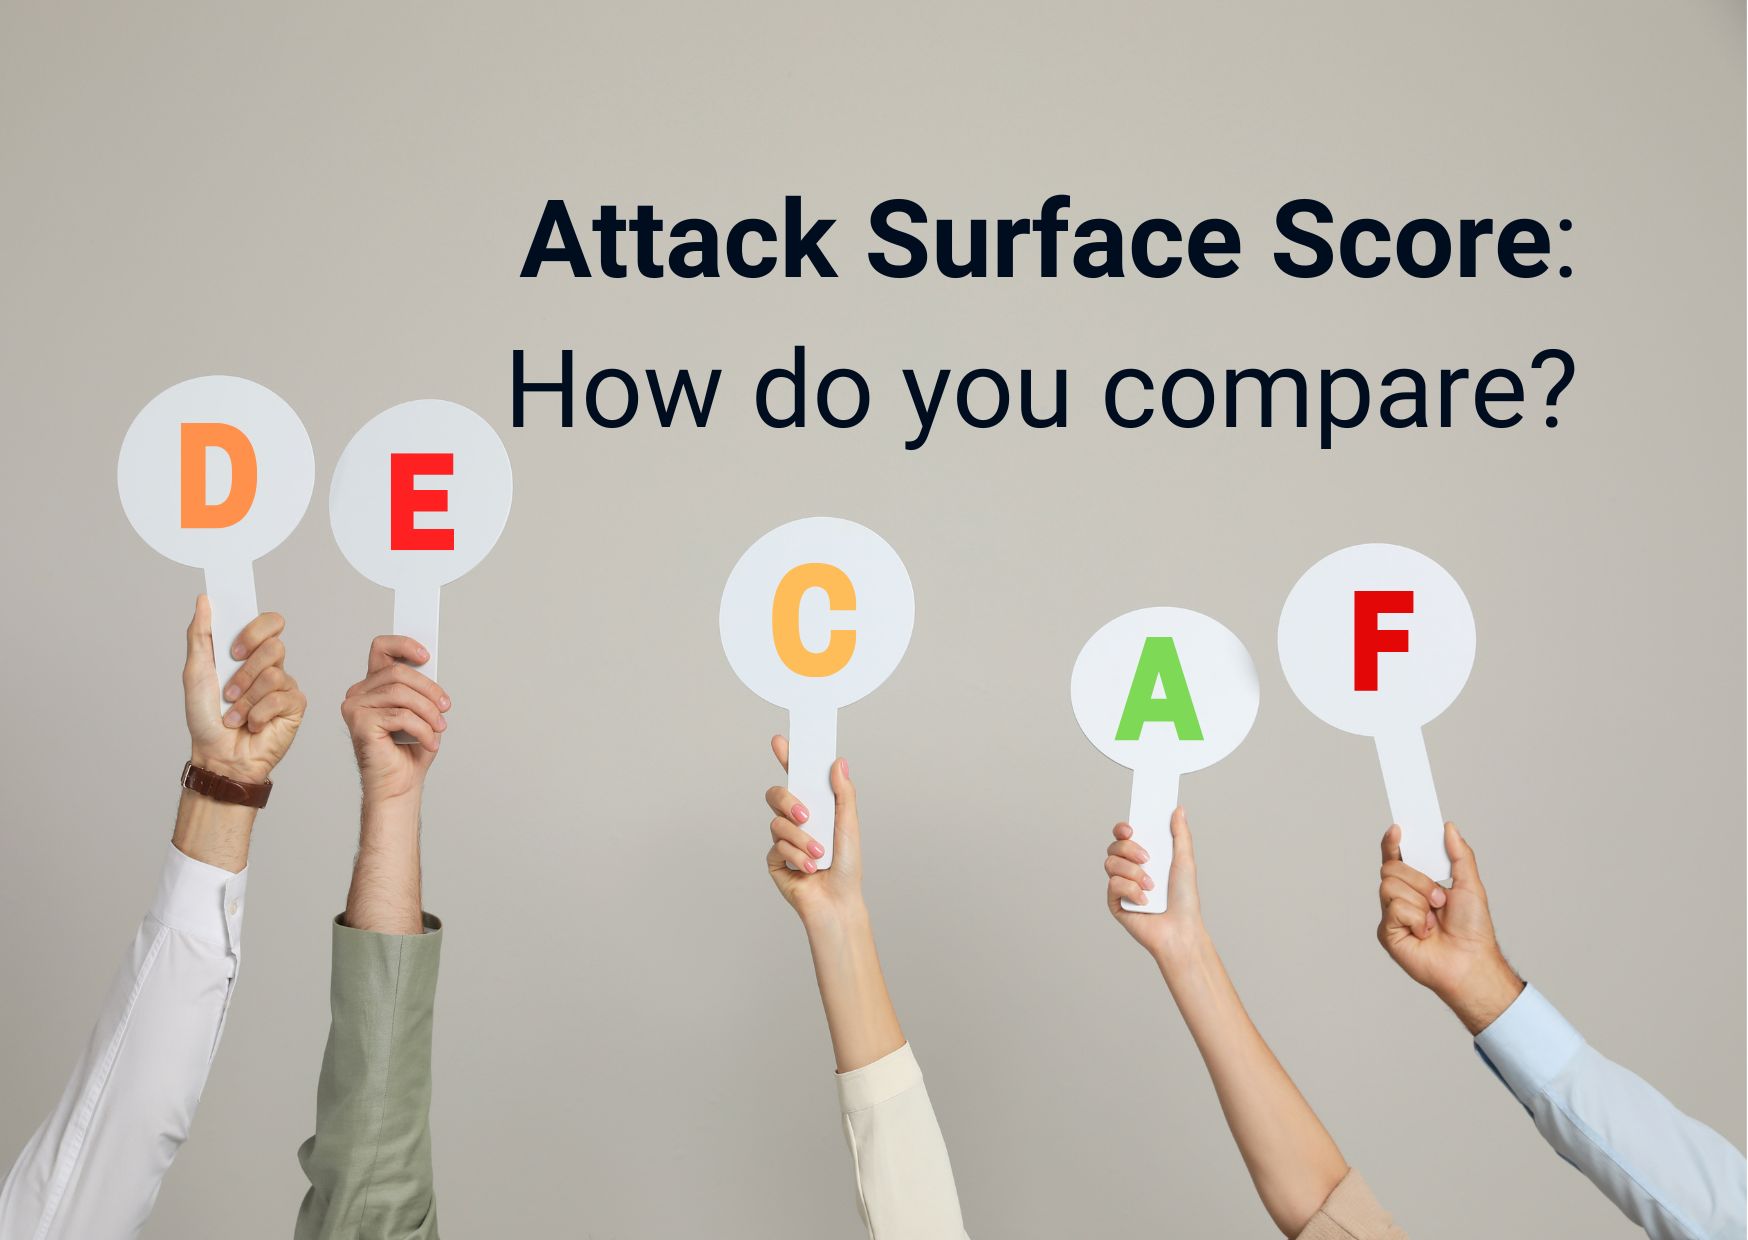 Attack surface score: How does your organization compare?